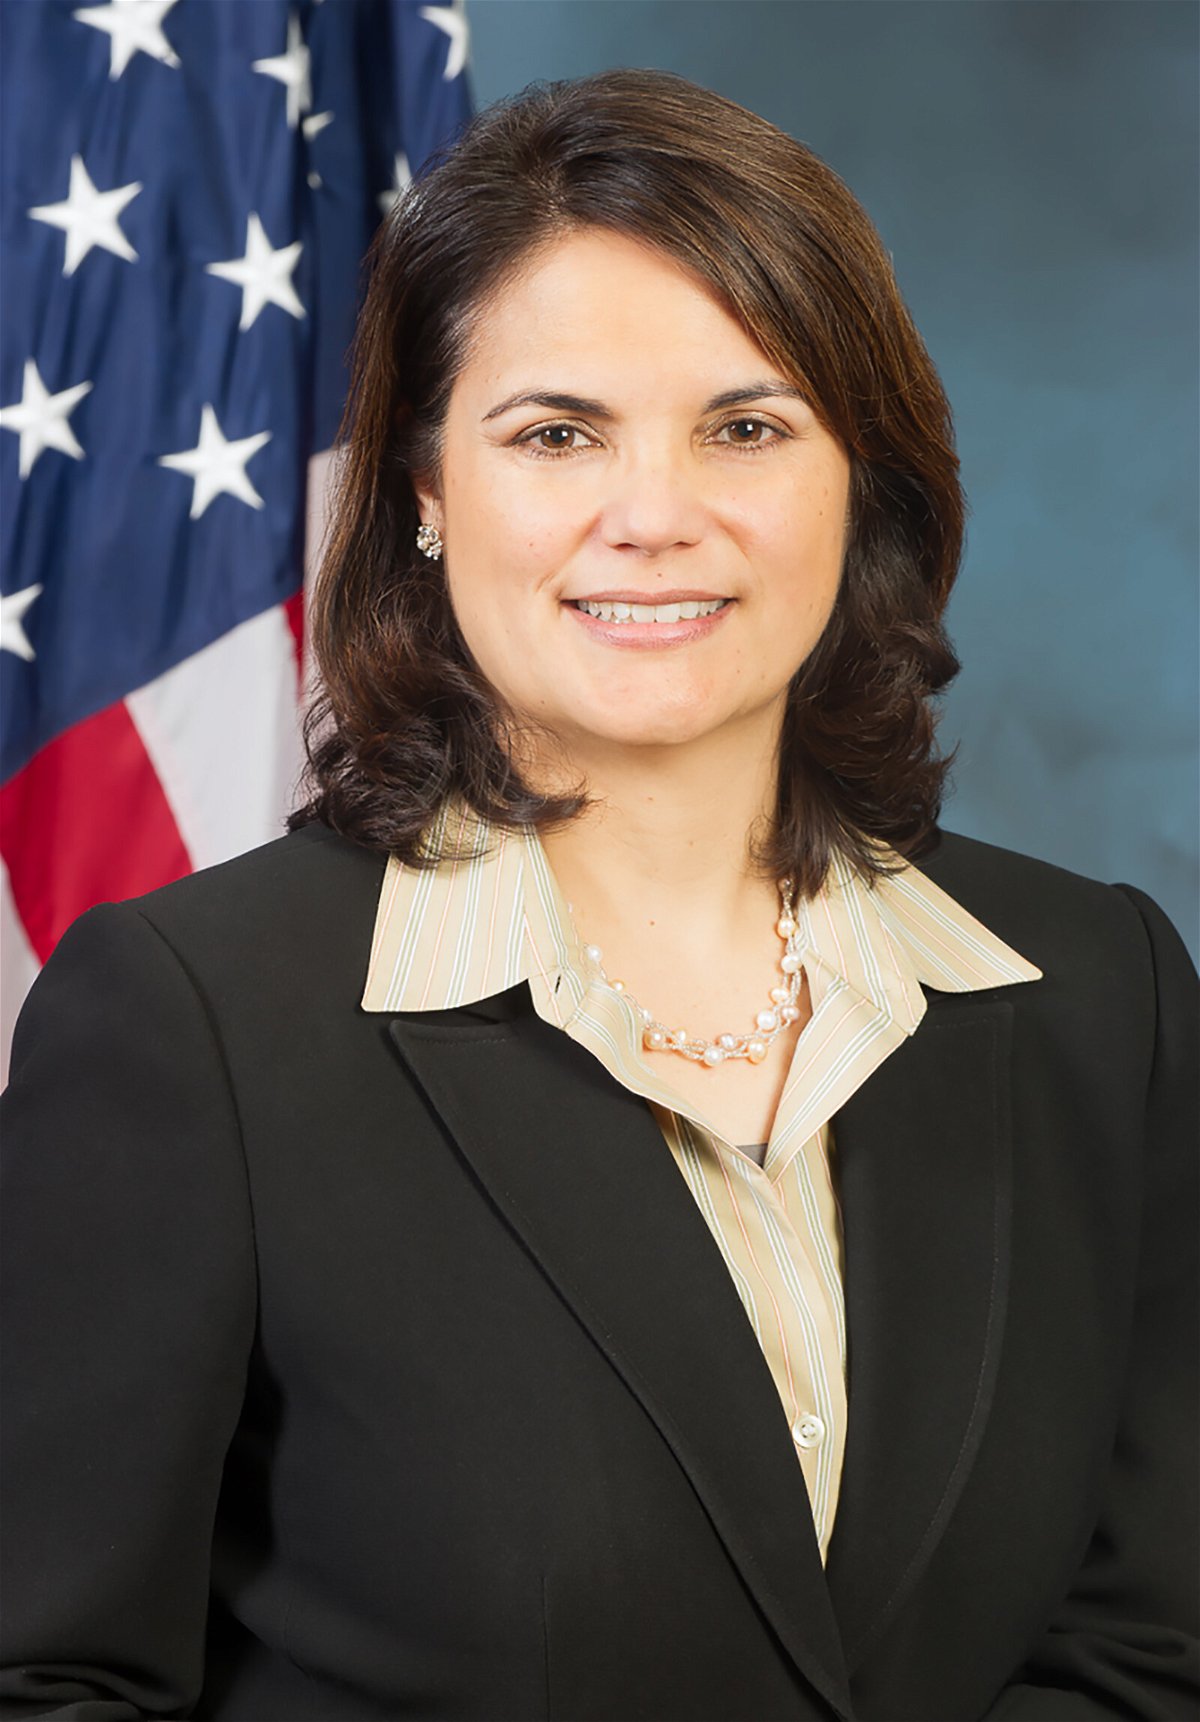 <i>HUD</i><br/>President Joe Biden will nominate Nani Coloretti to serve as deputy director of the Office of Management and Budget.